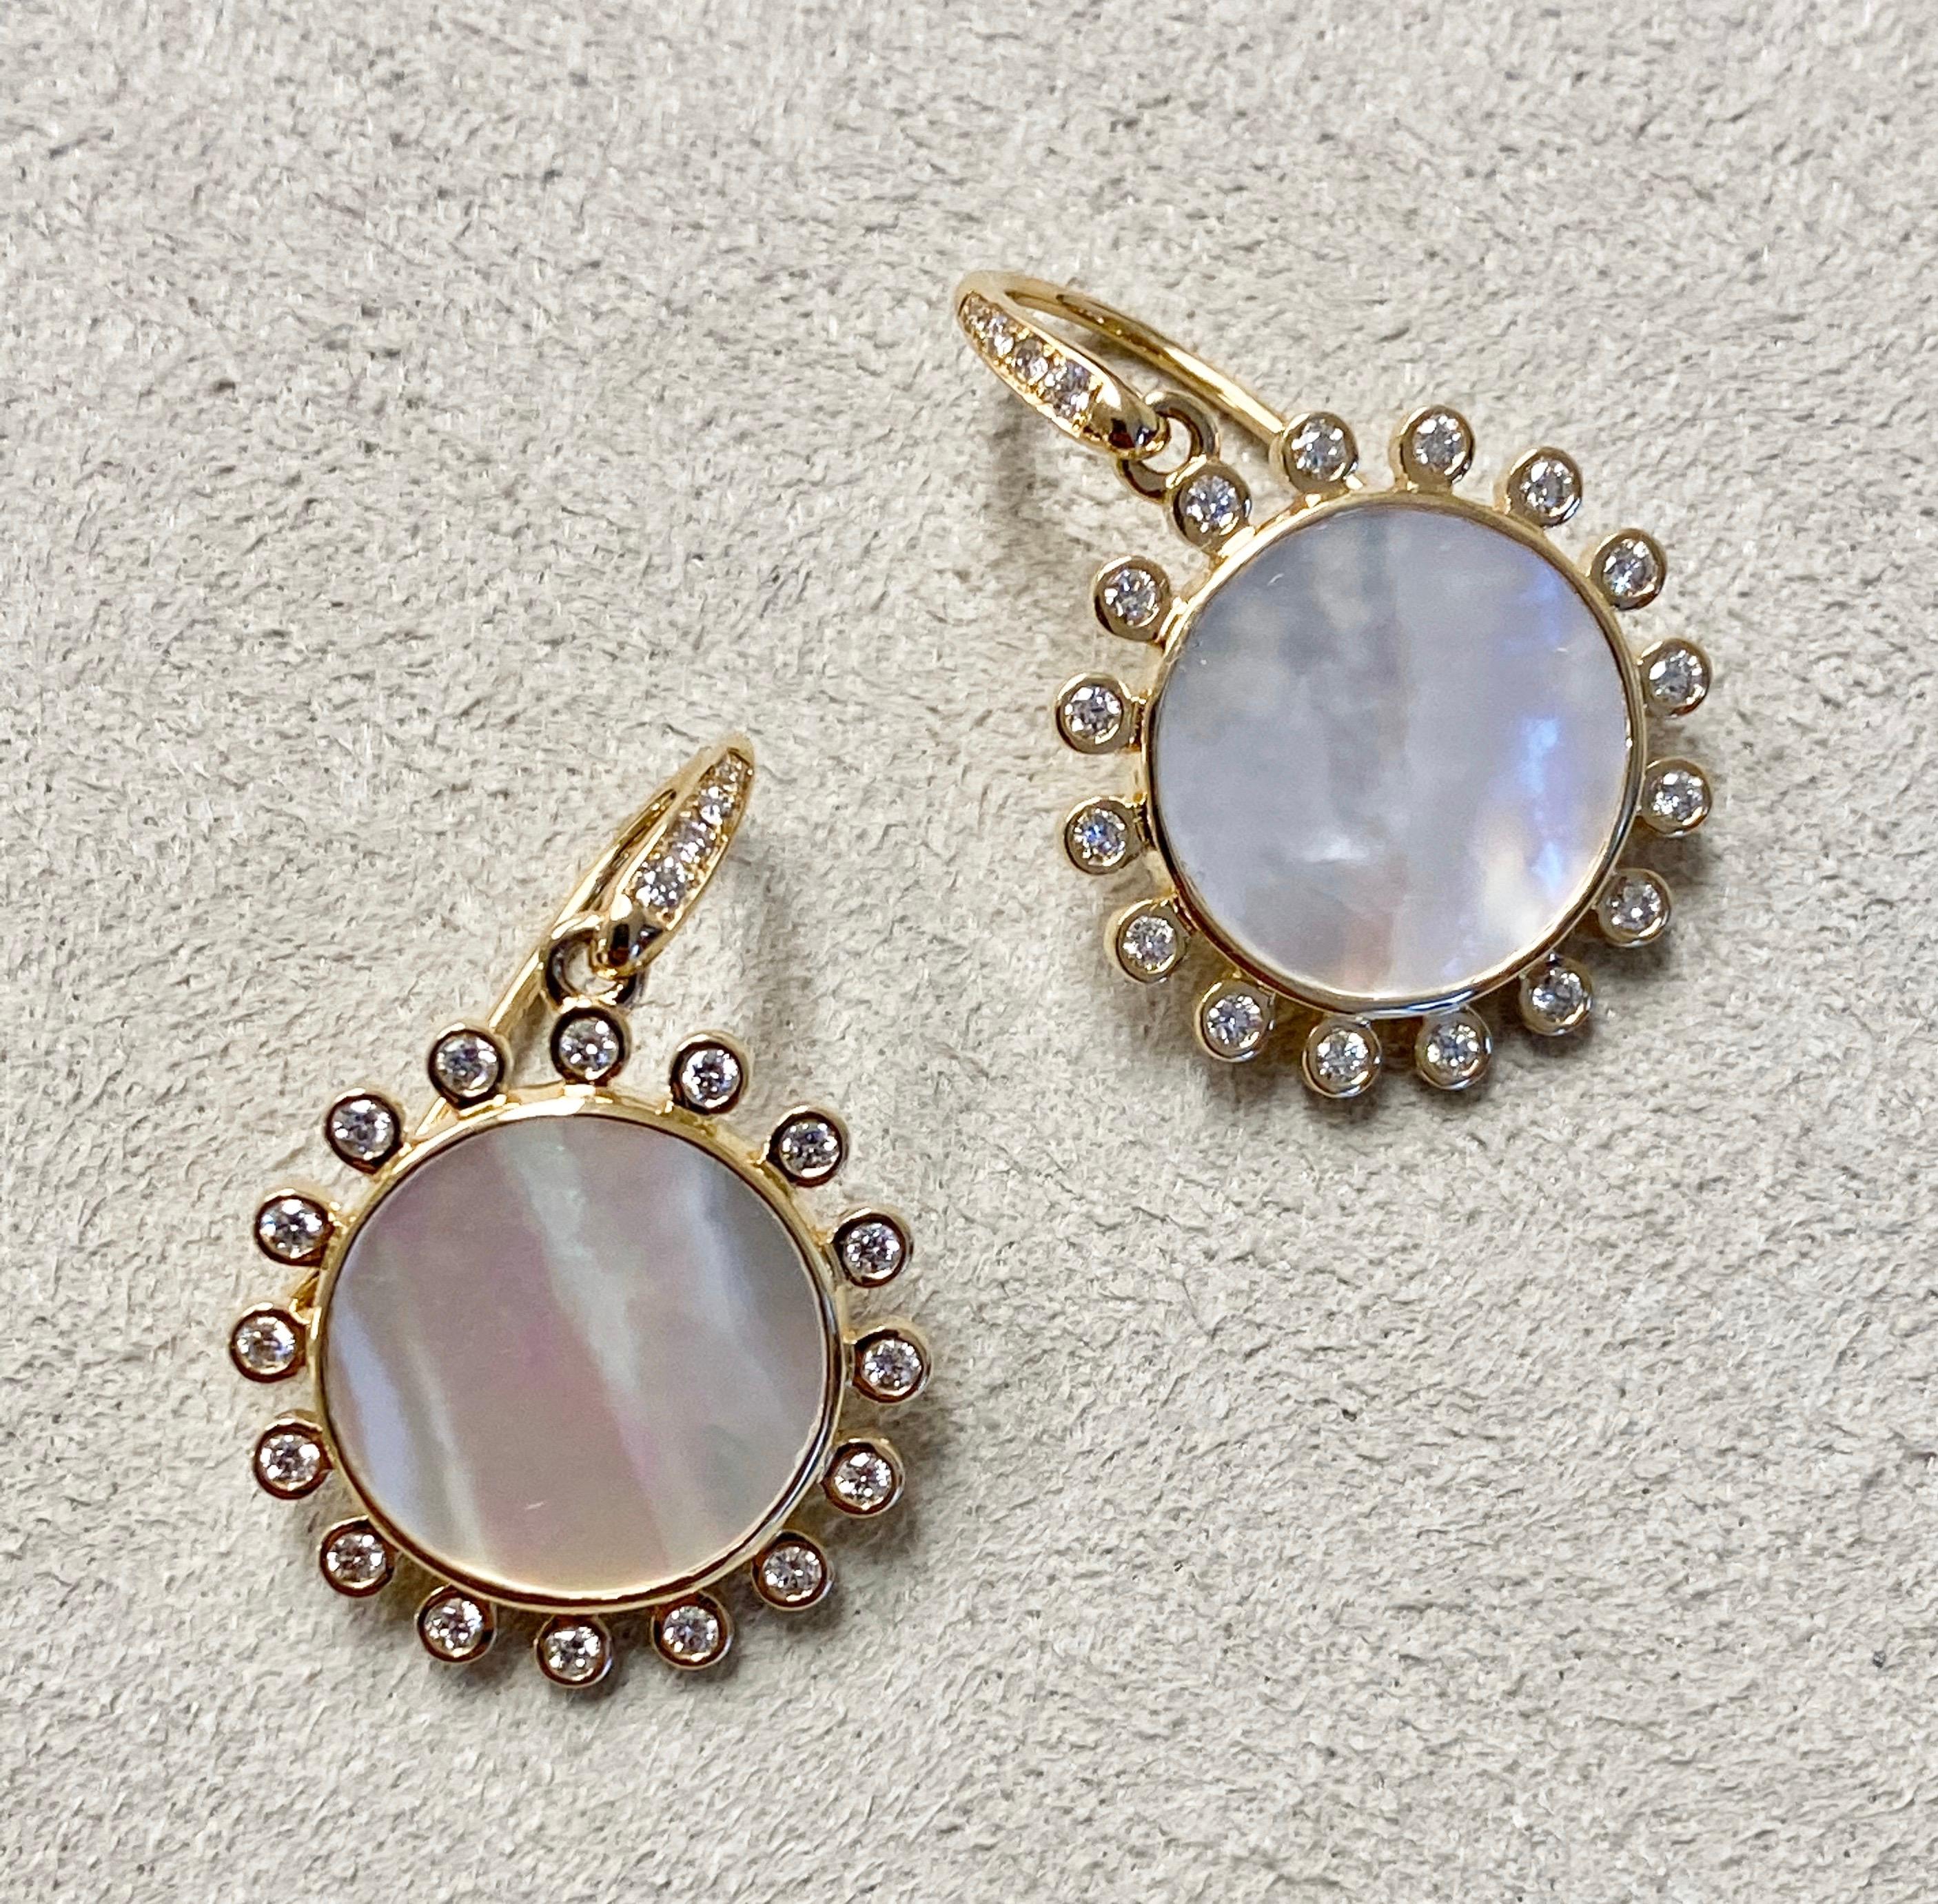 Created in 18 karat yellow gold
Mother of pearl 7 cts approx
Diamonds 0.40 cts approx
Limited edition

These exquisite limited edition earrings feature dazzling candy blue topaz stones and delicate diamonds of .40 cts, housed in a luminous 18 karat